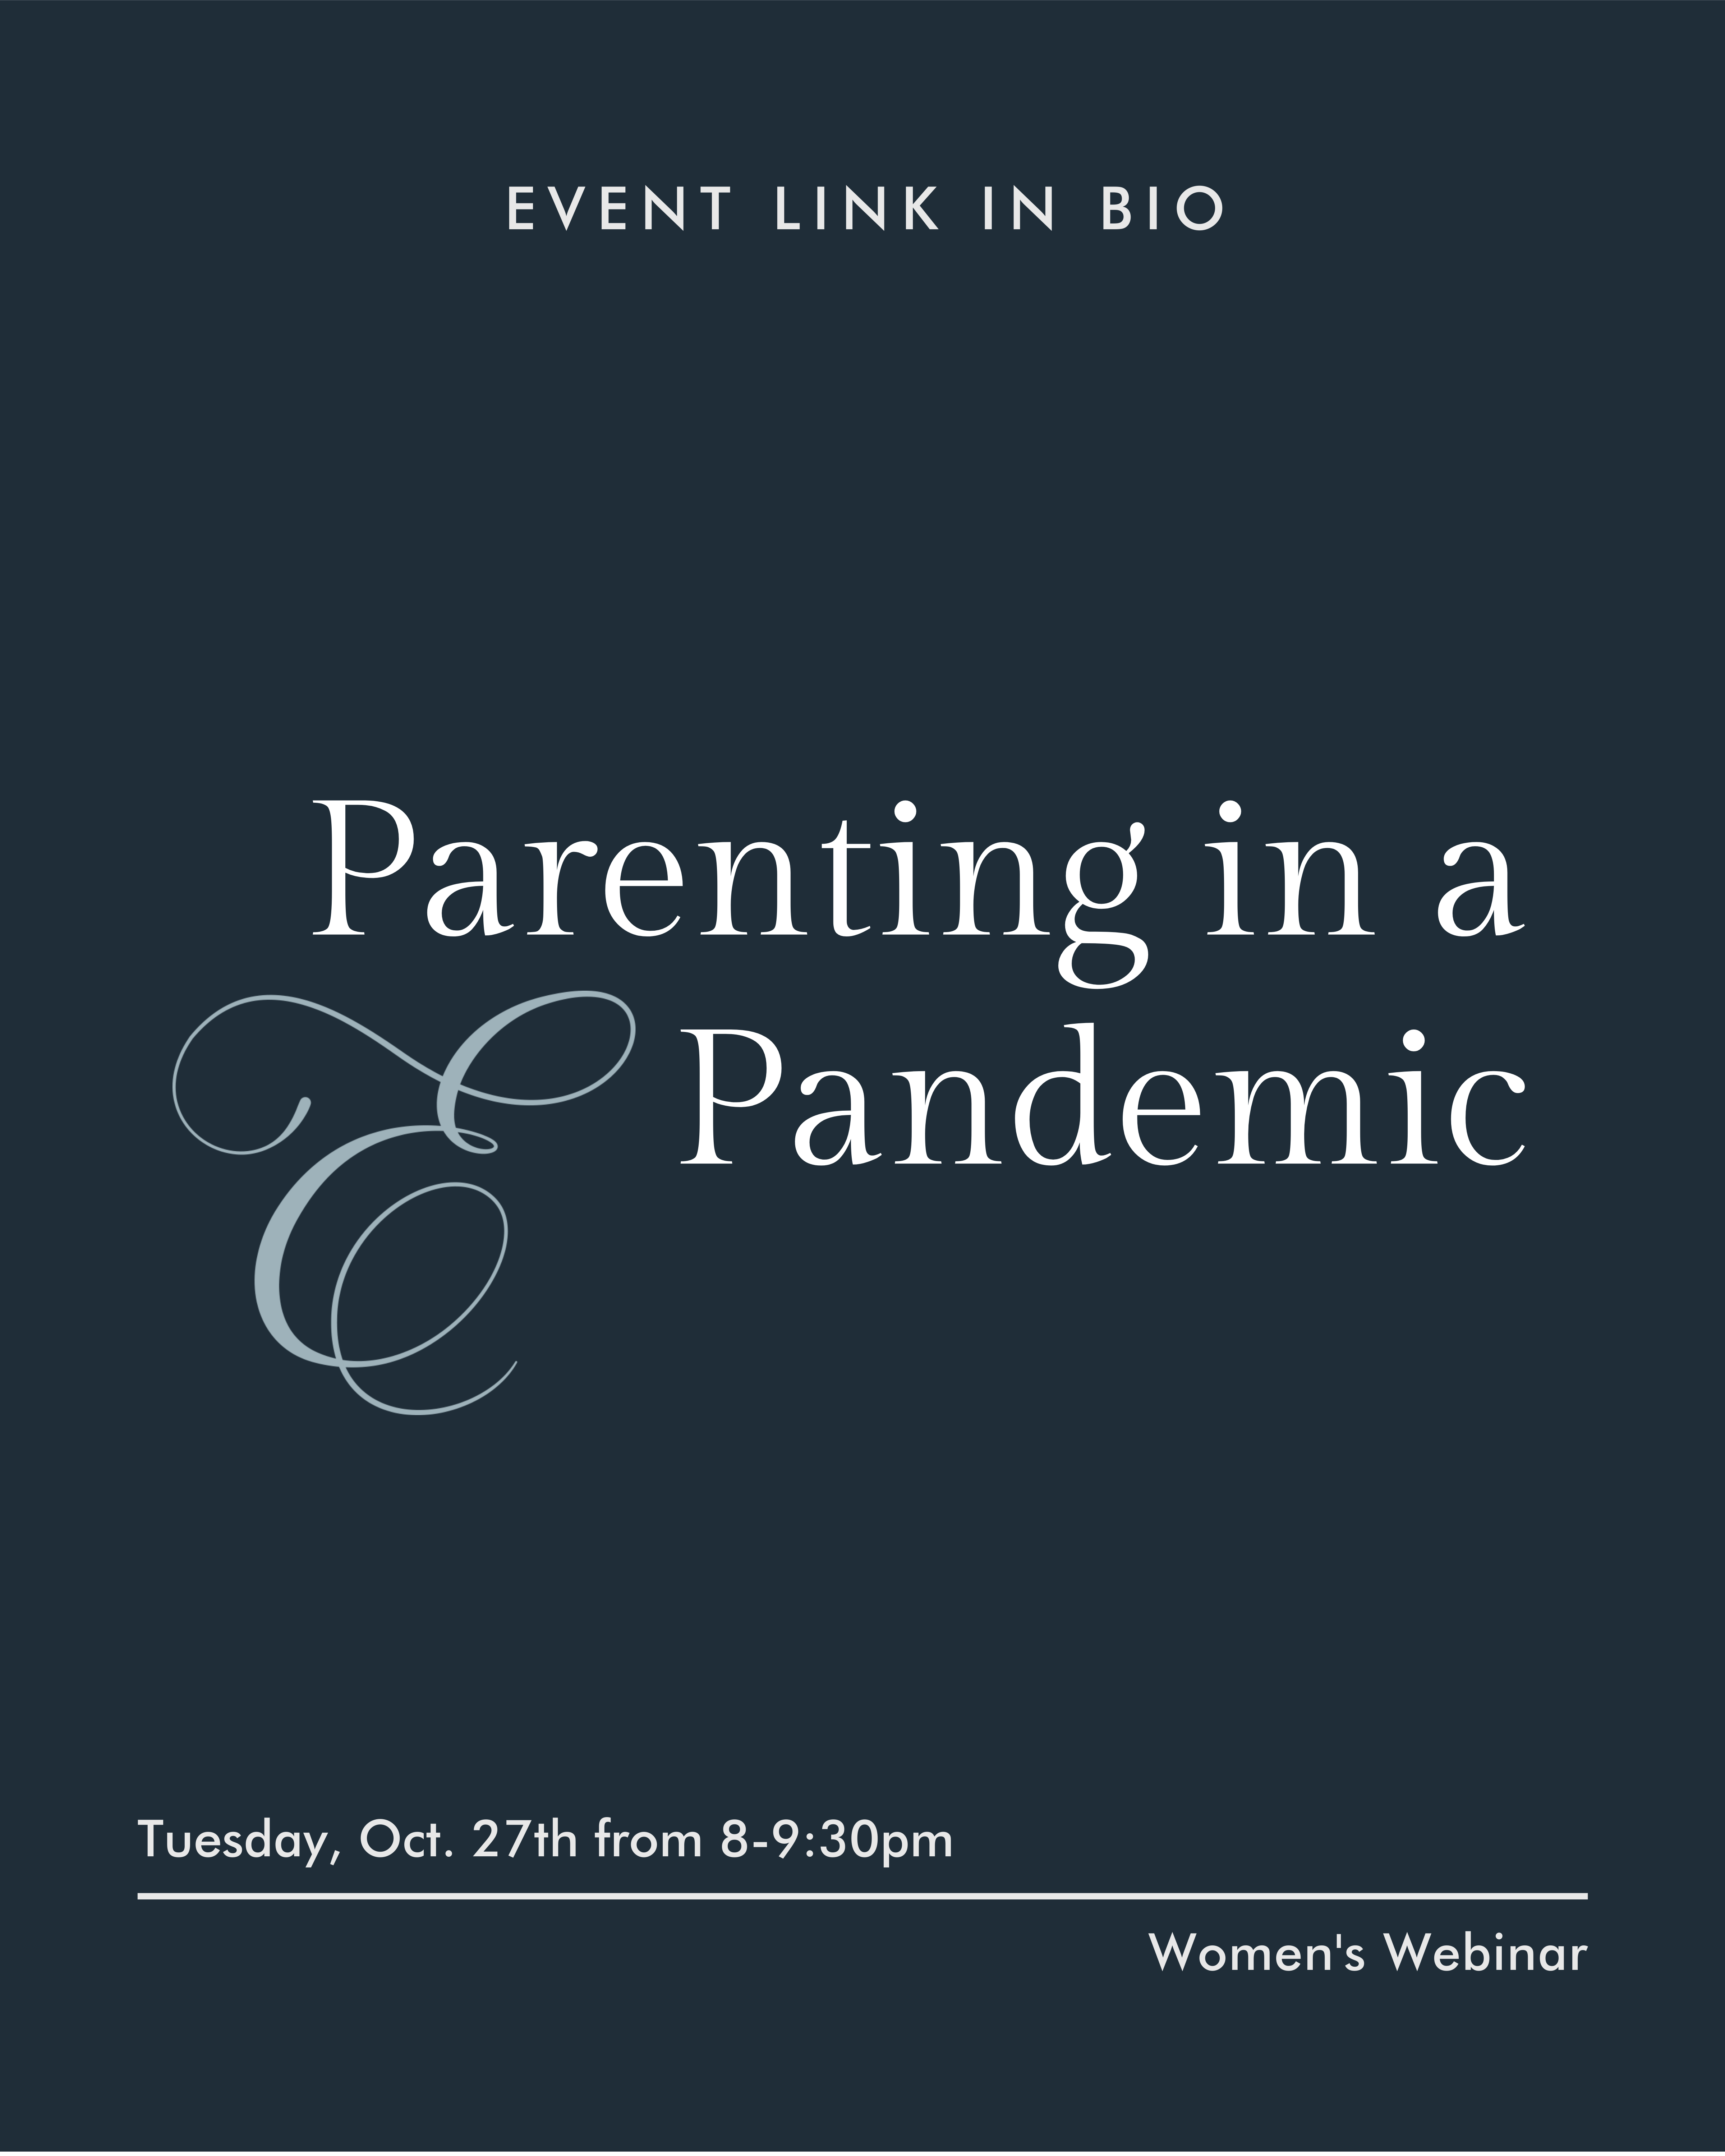 Parenting in a Pandemic